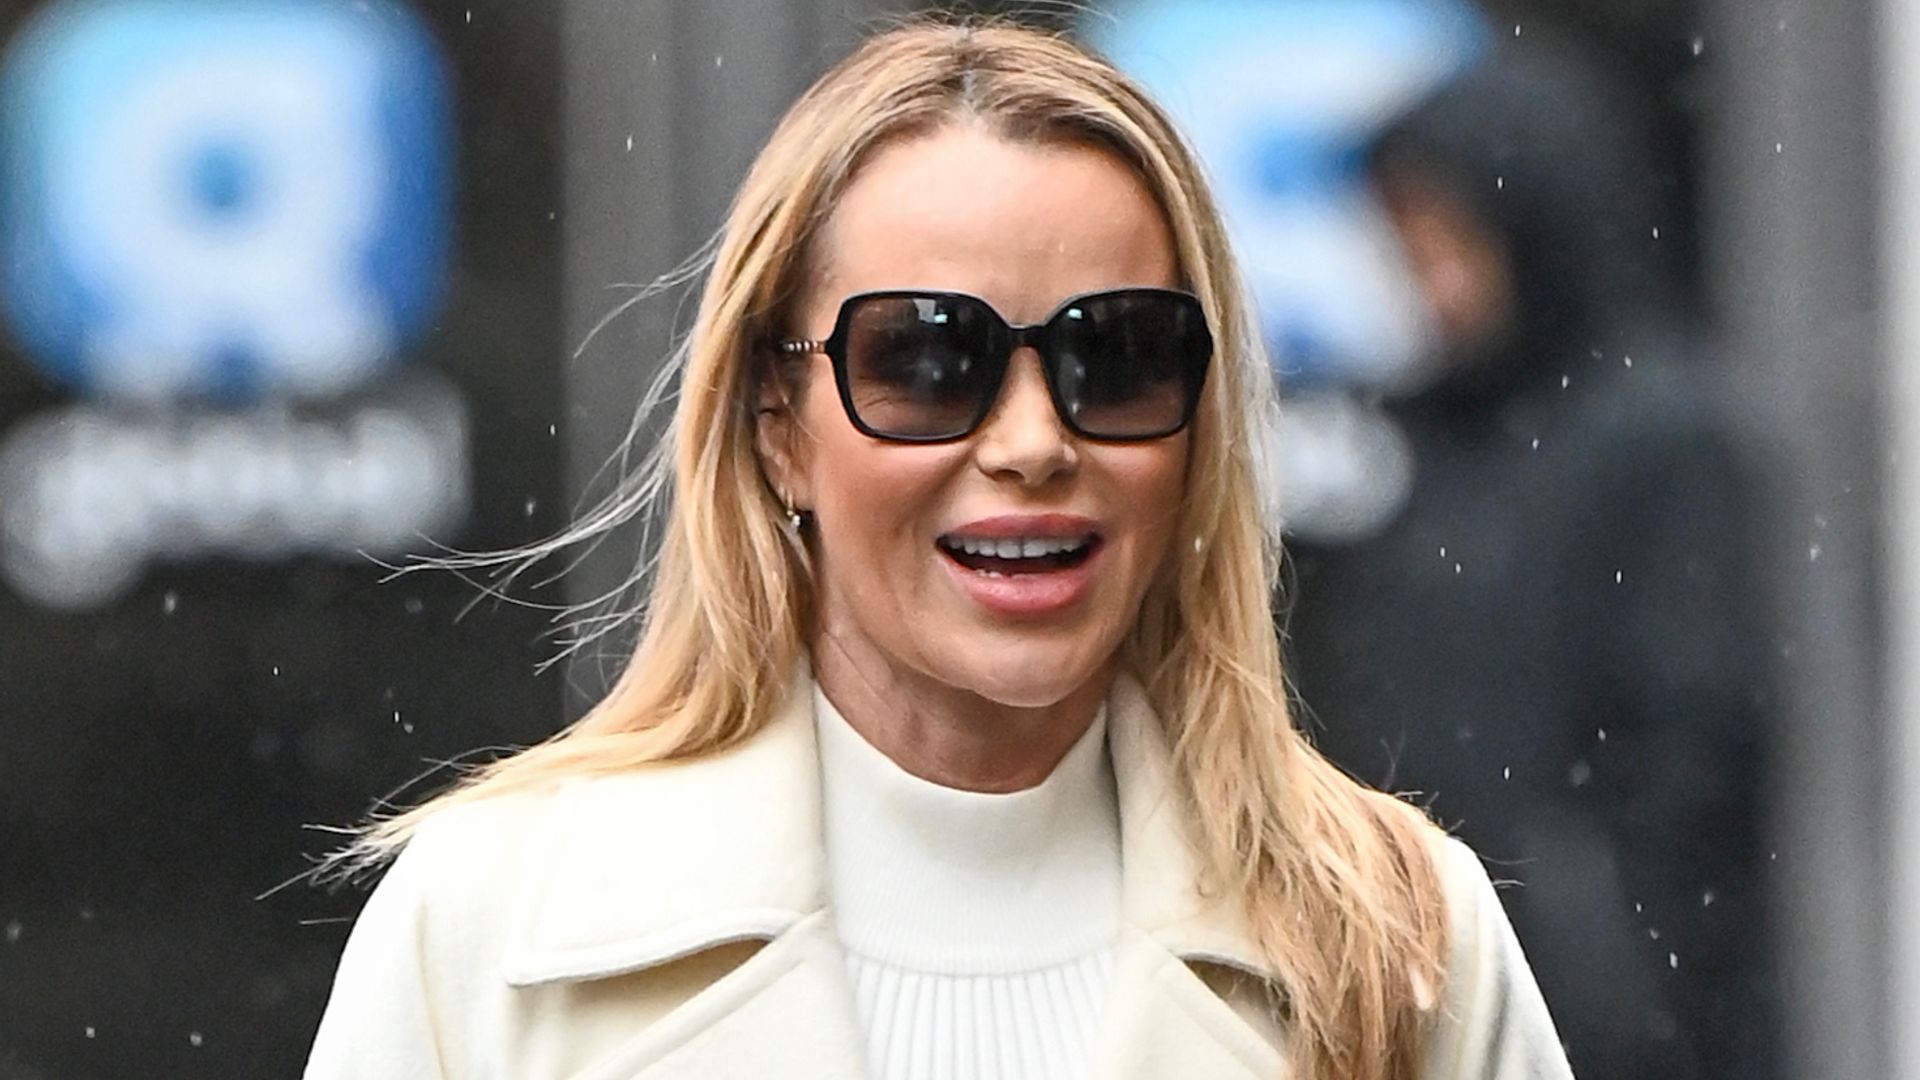 Amanda Holden wows fans in tiny crop top and leggings for stunning